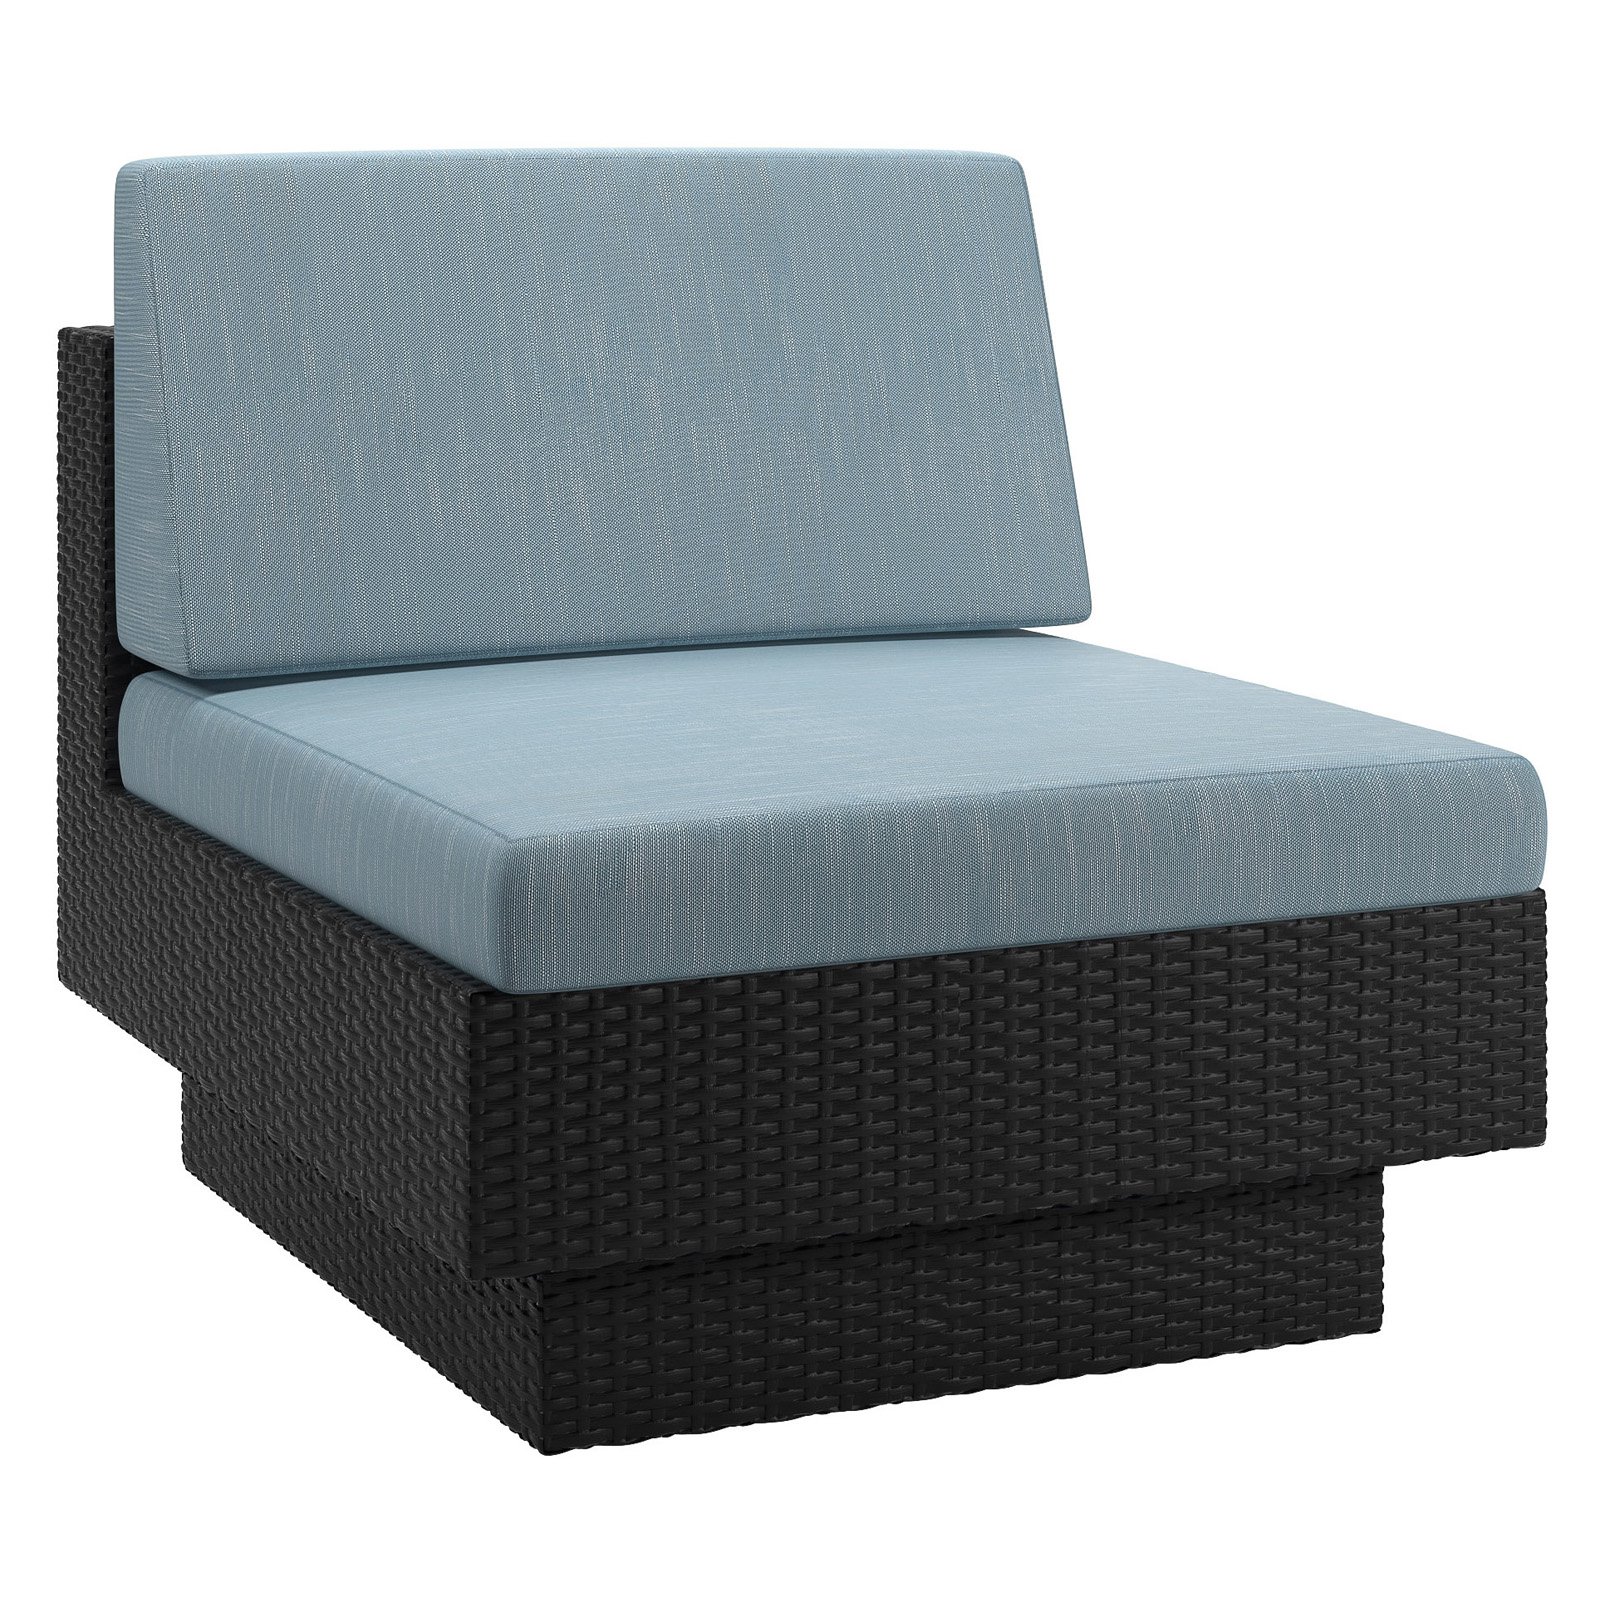 CorLiving Patio Middle Seat in Textured Black Weave with Teal Cushions - image 3 of 3